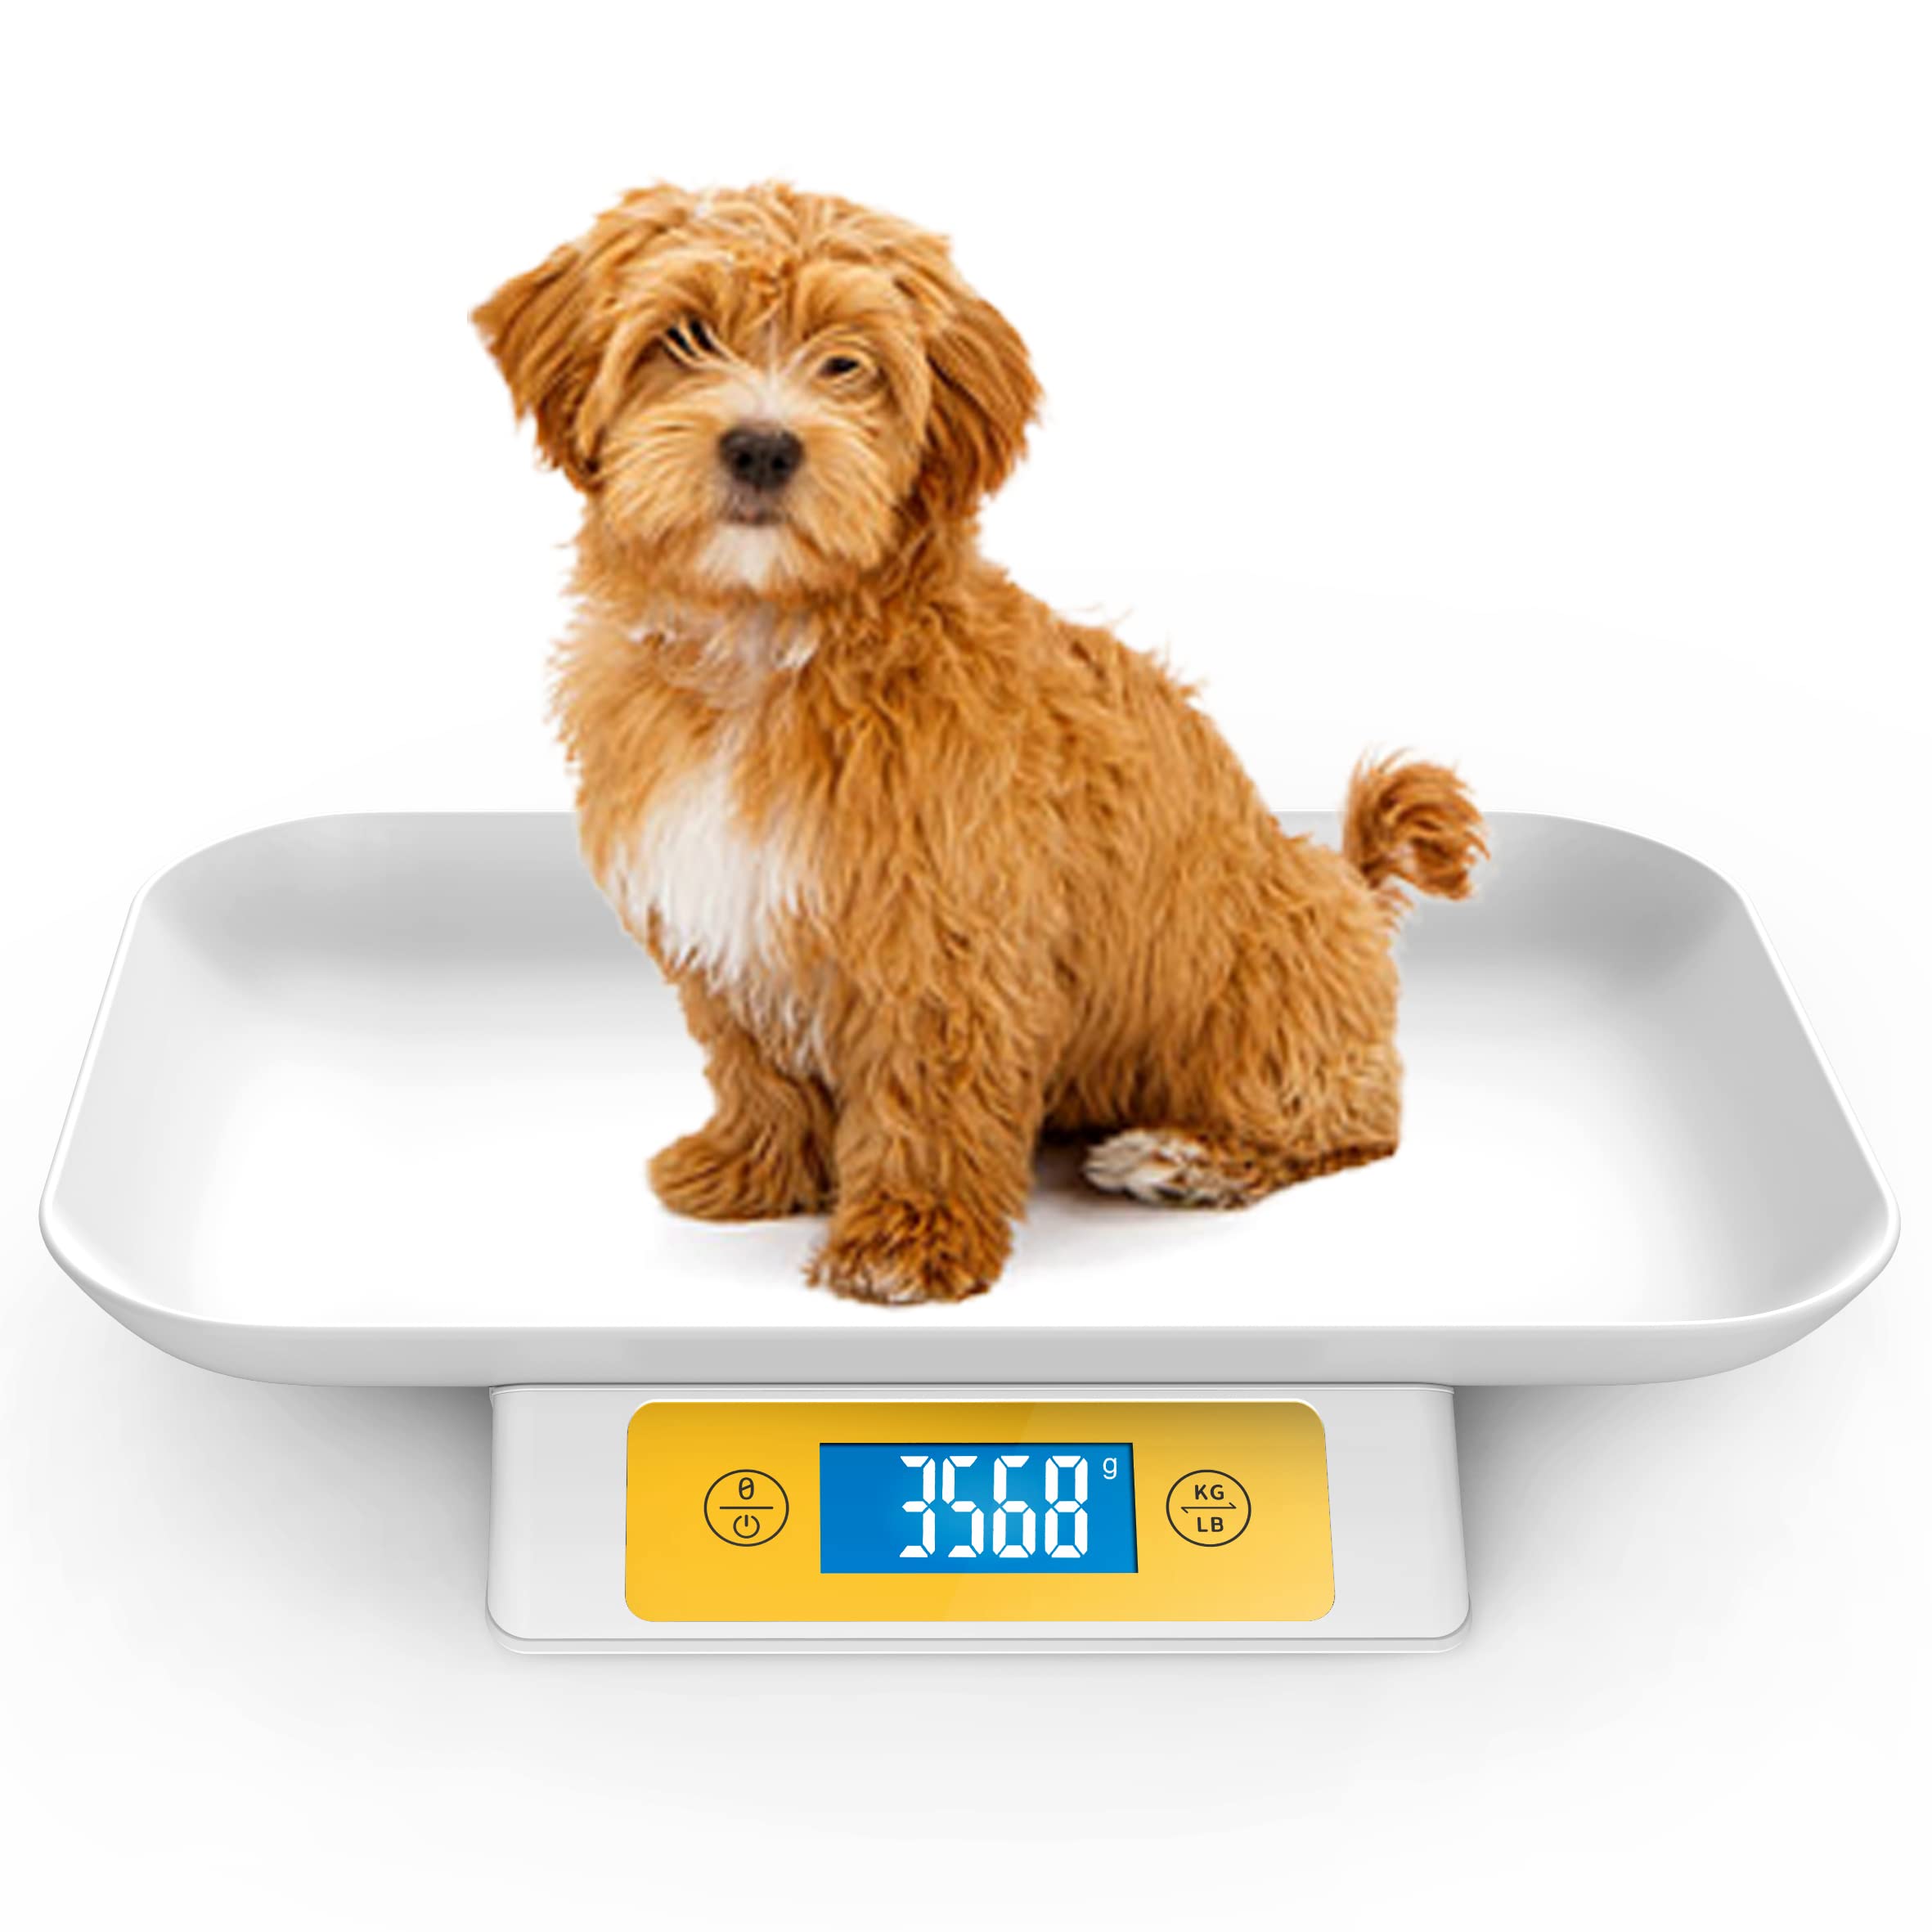 Newborn Pet Scale for Puppy and Kitten, Pet Scale with Detachable Tray for Dog Whelping Nursing, Weigh Pets Baby in Grams, 33lbs (0.03oz), Size 11x